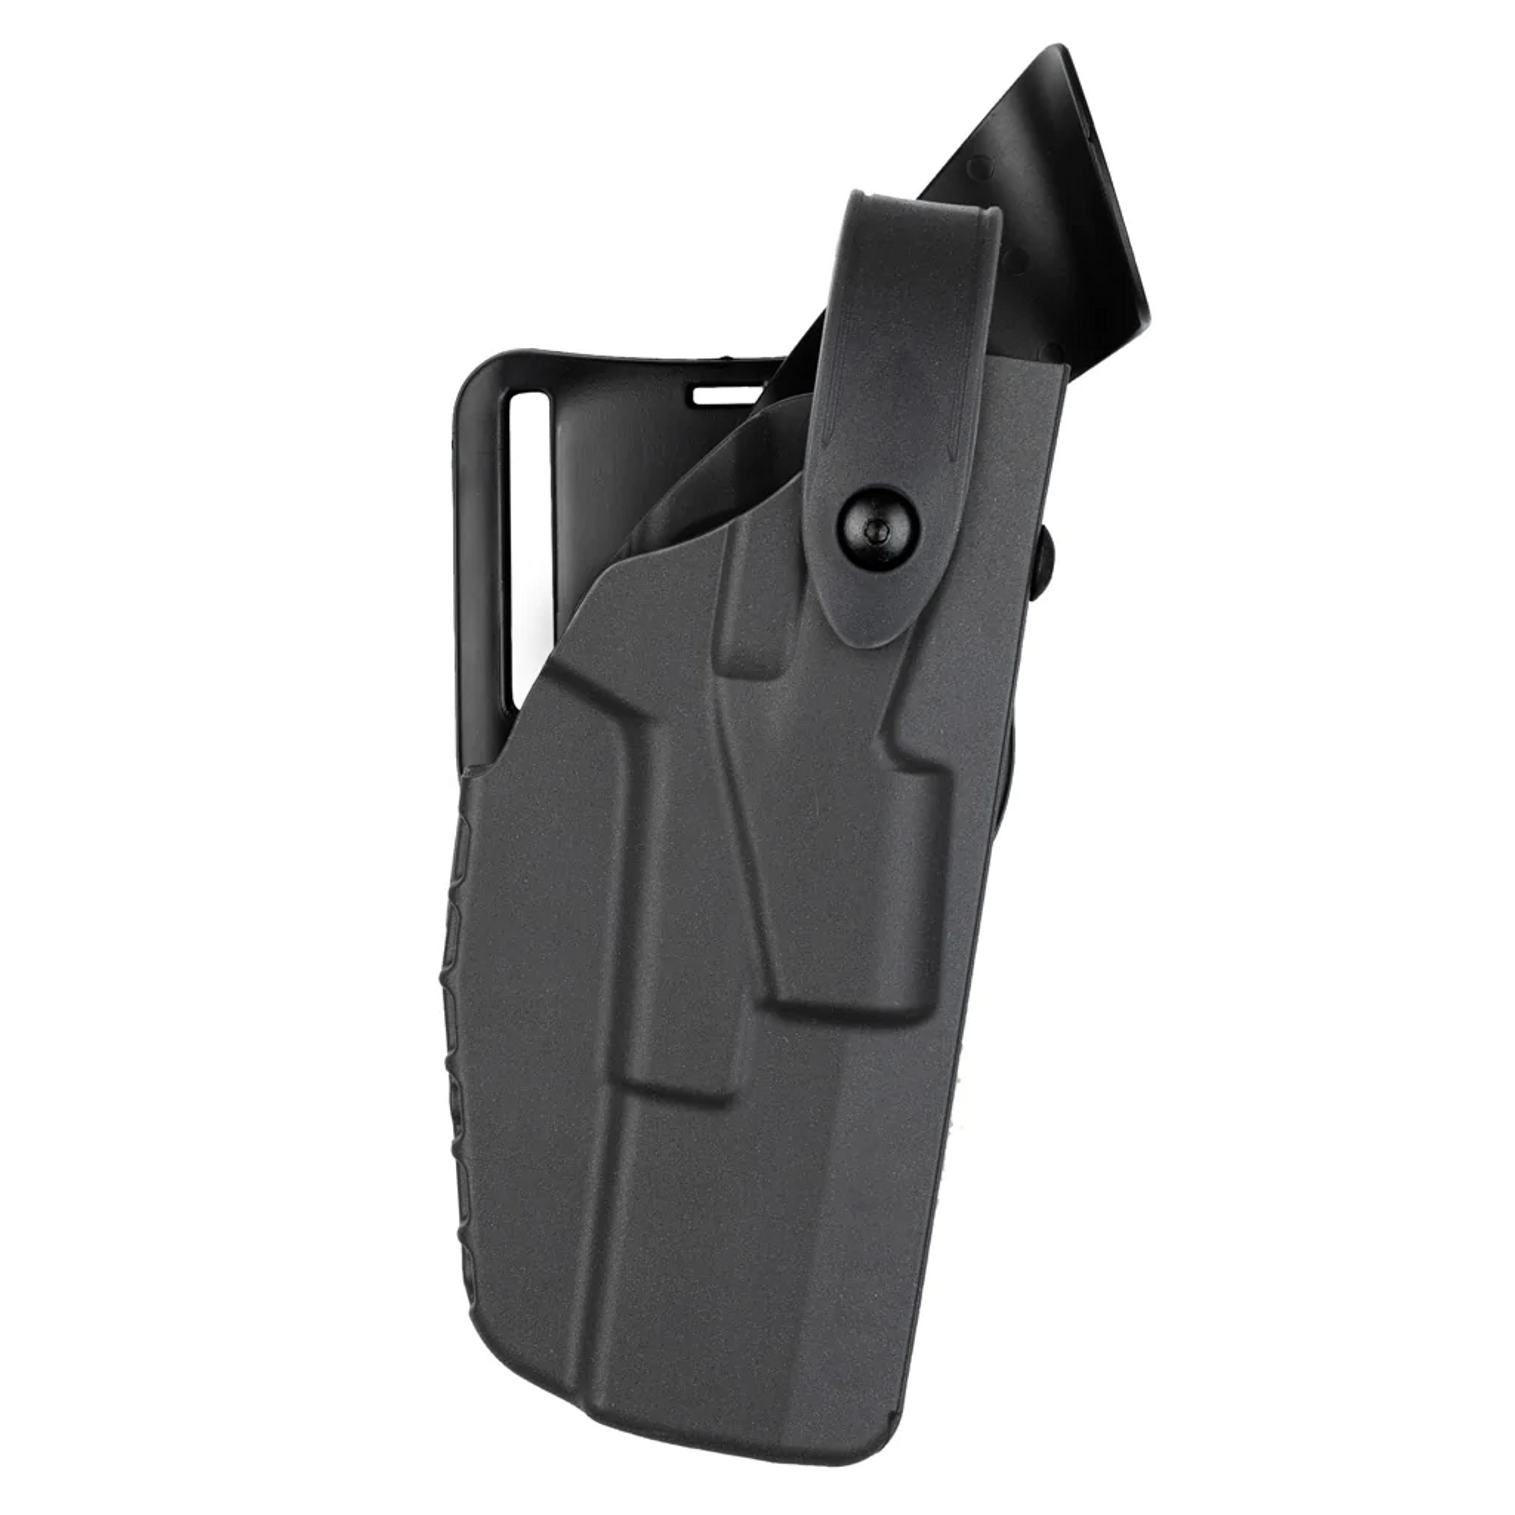 Model 7360 7ts Als/sls Mid-ride Duty Holster For Smith & Wesson M&p 2.0 9